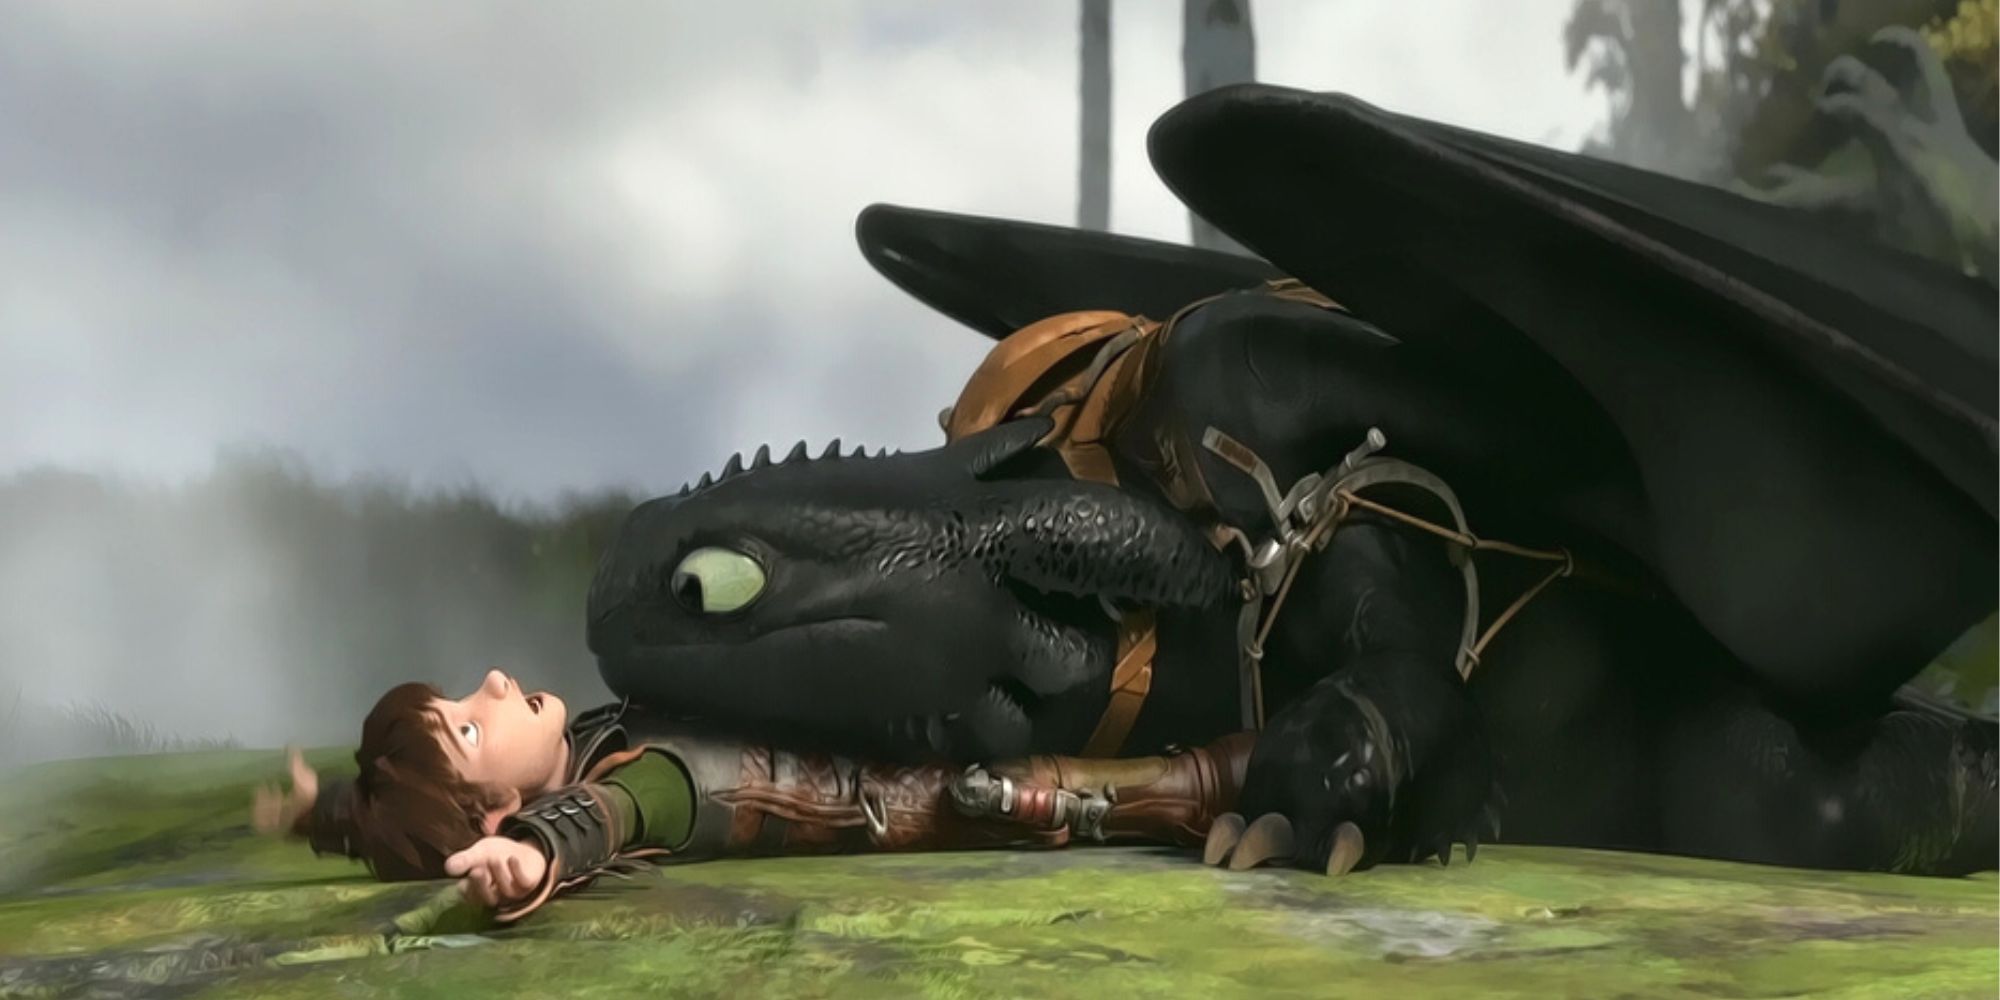 Toothless laying over Hiccup in How to Train Your Dragon 2 (2014)